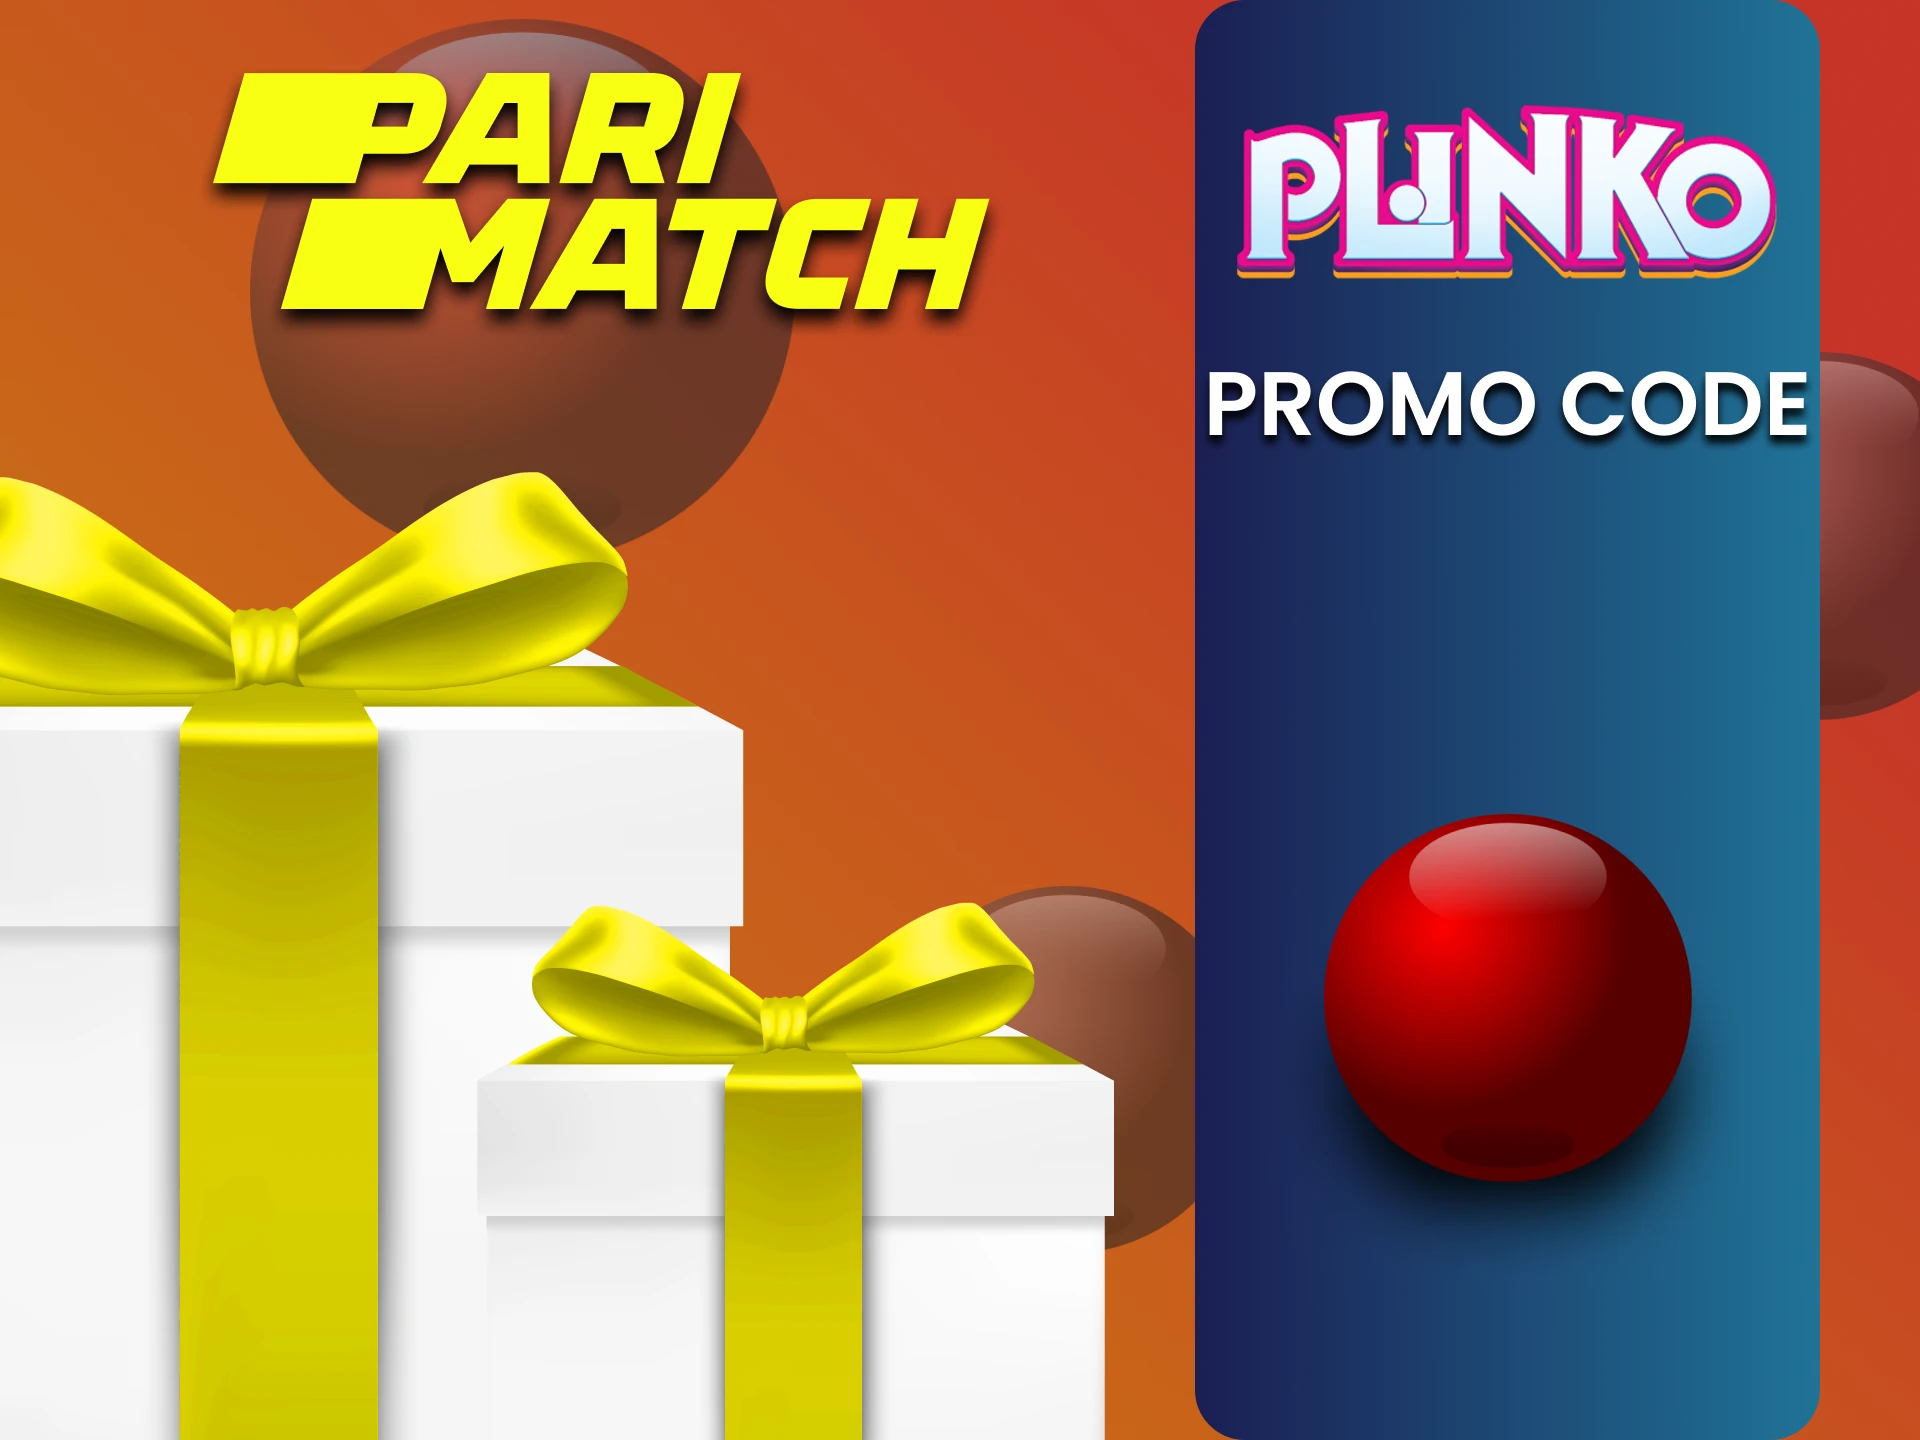 Use a promotional code from Parimatch for Plinko.